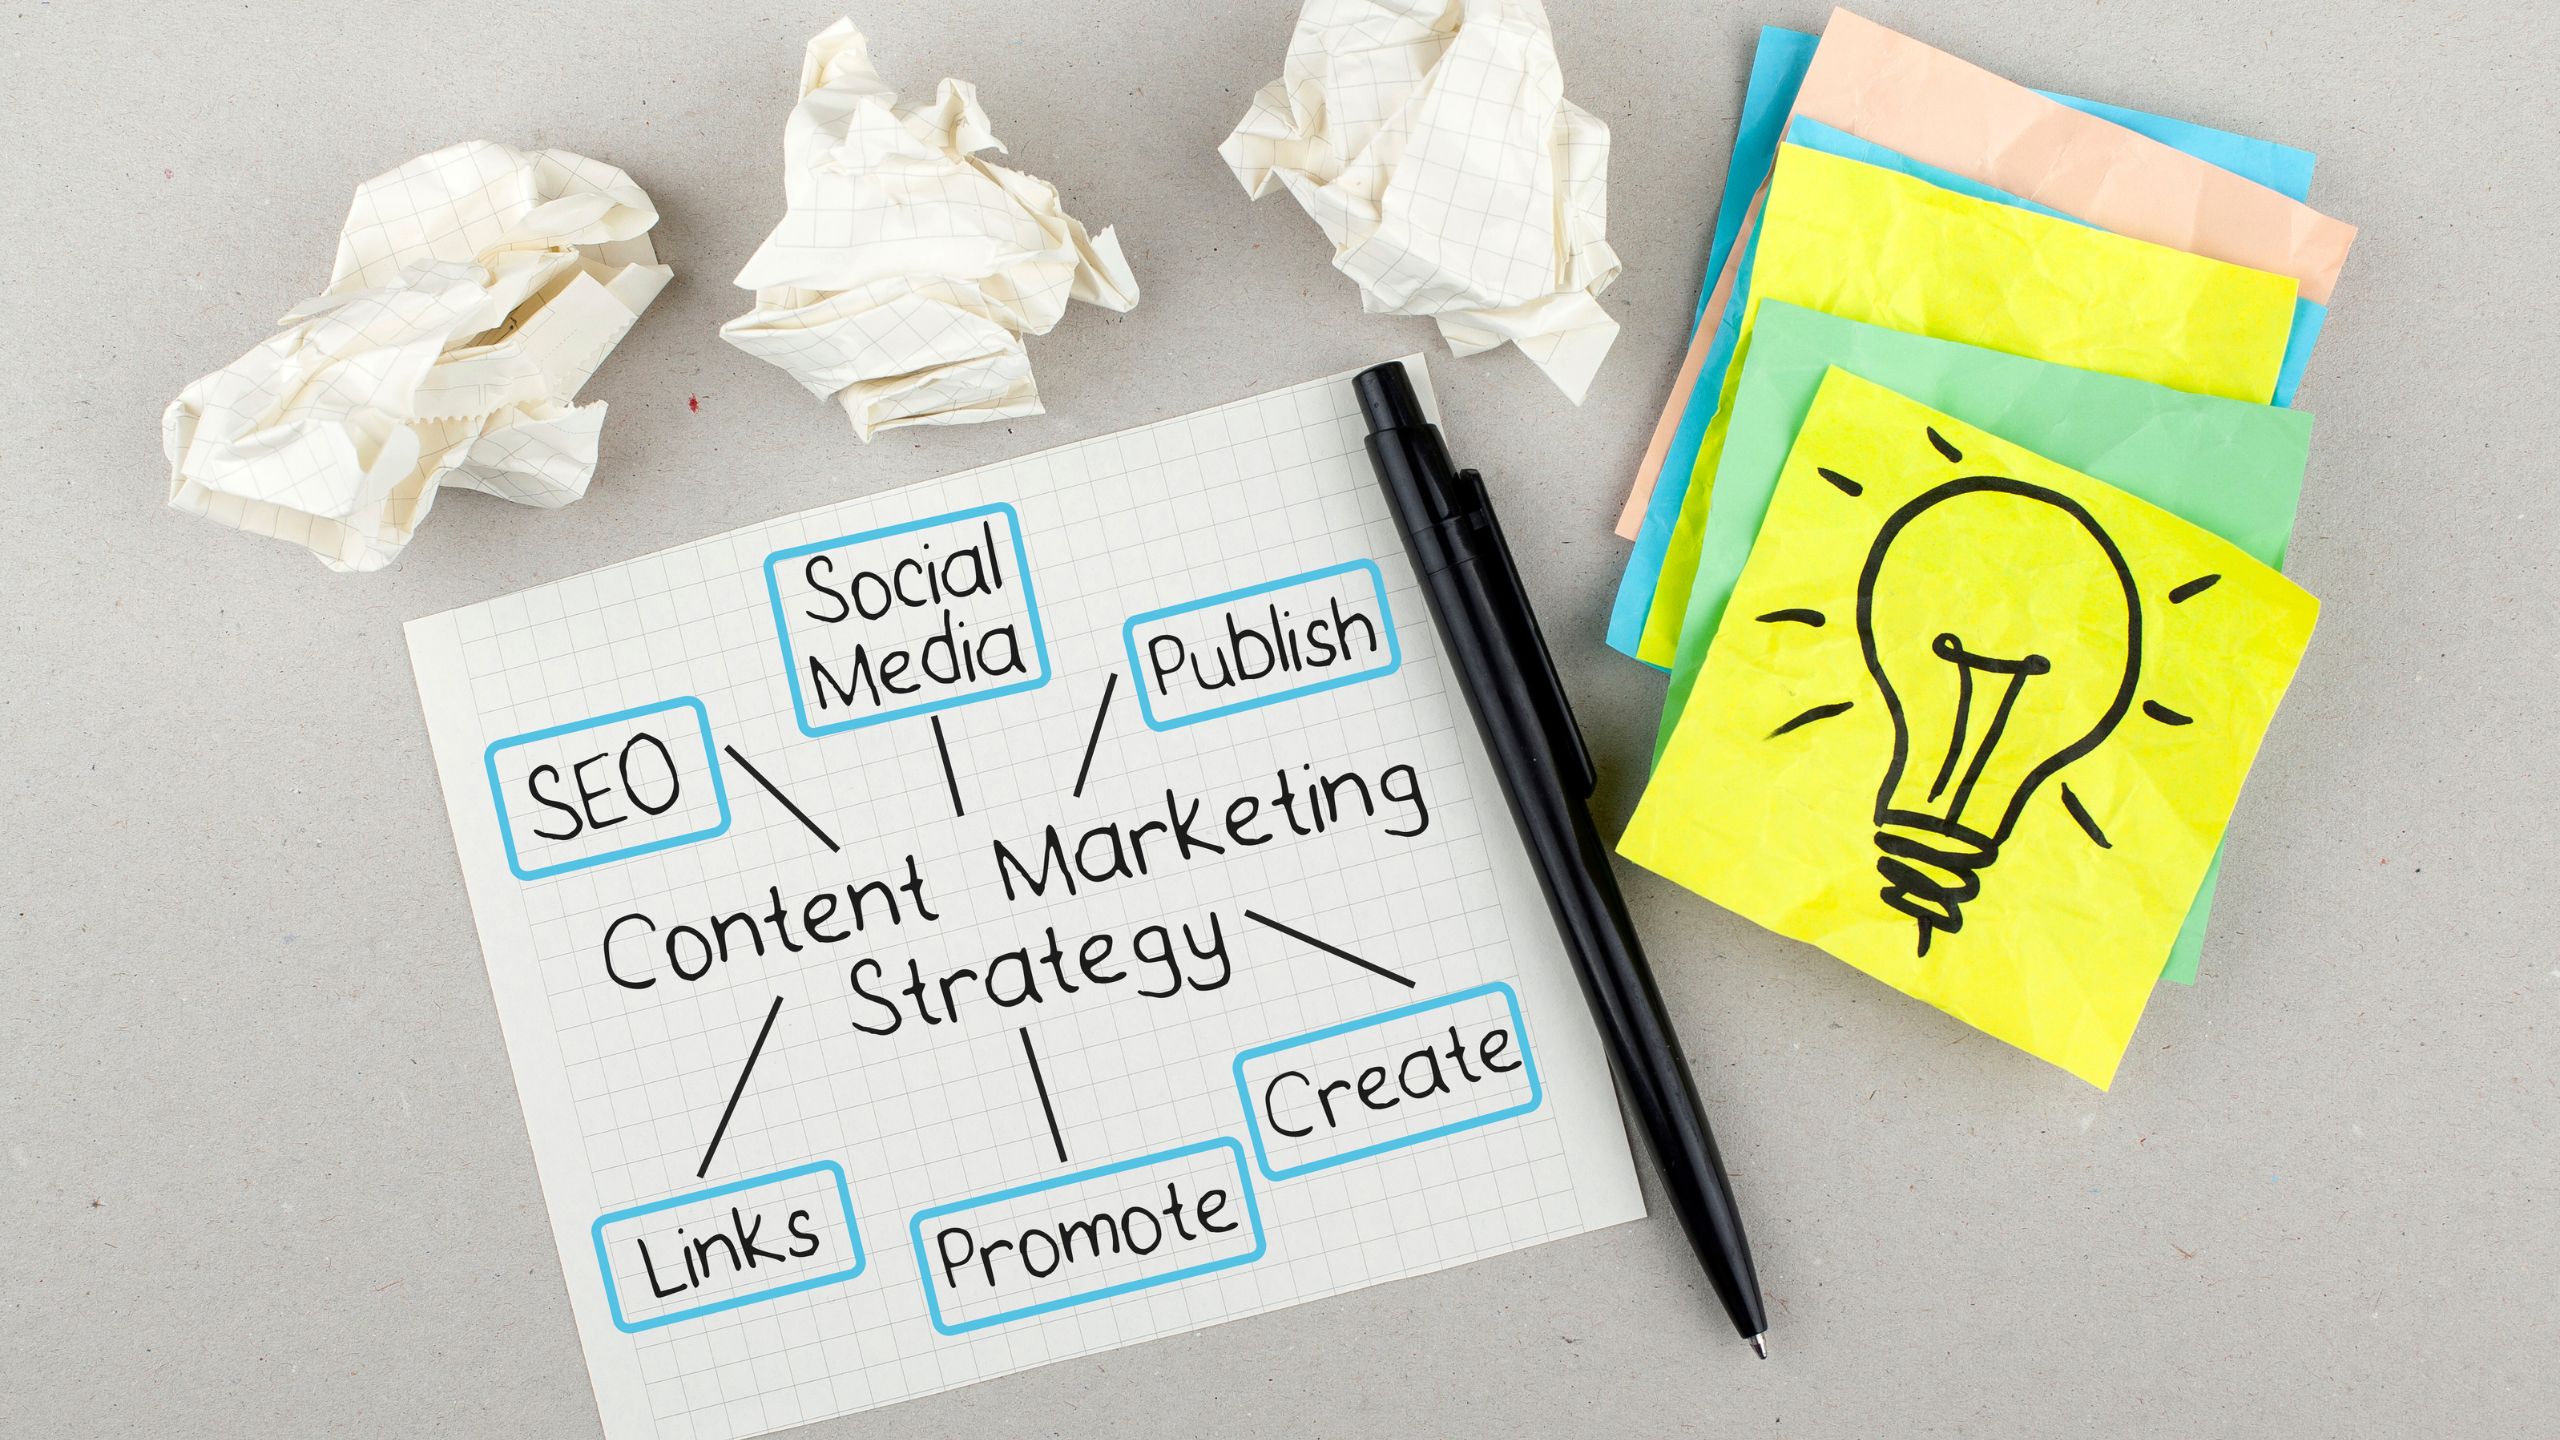 Effective Content Strategy